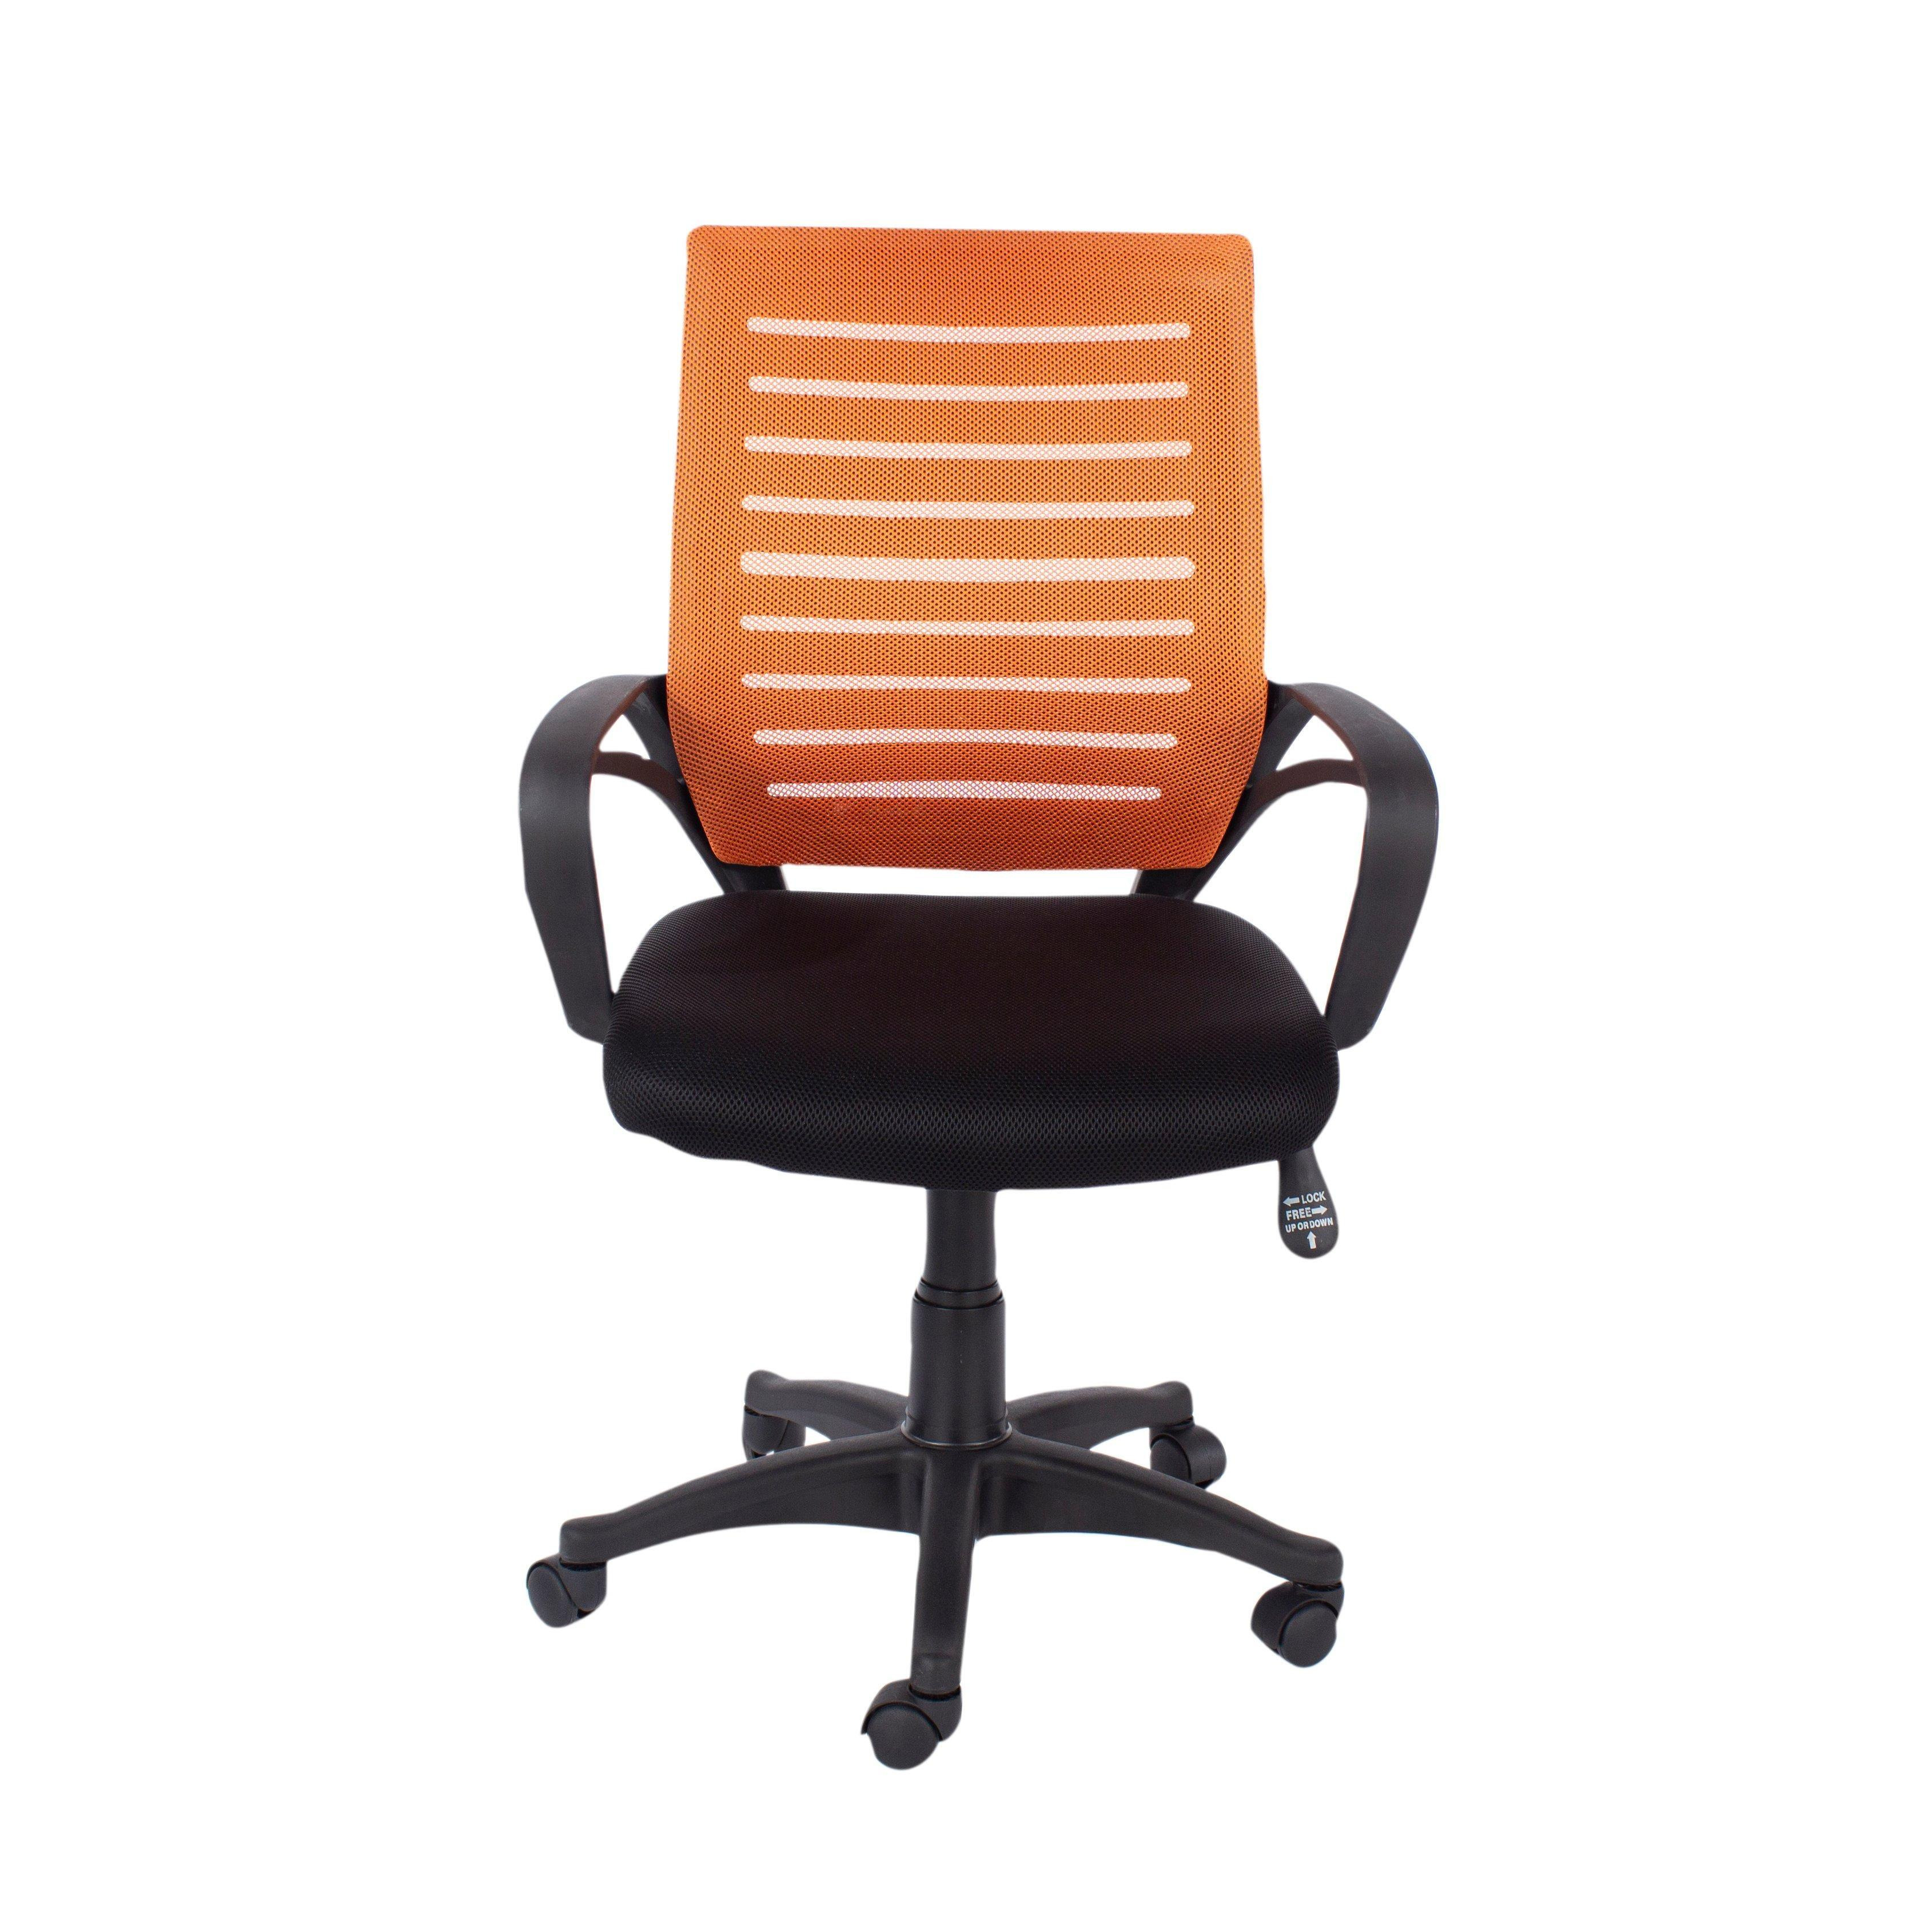 Loft Home Office Study Chair With Arms, Orange Mesh Back, Black Fabric Seat With Black Base - image 1